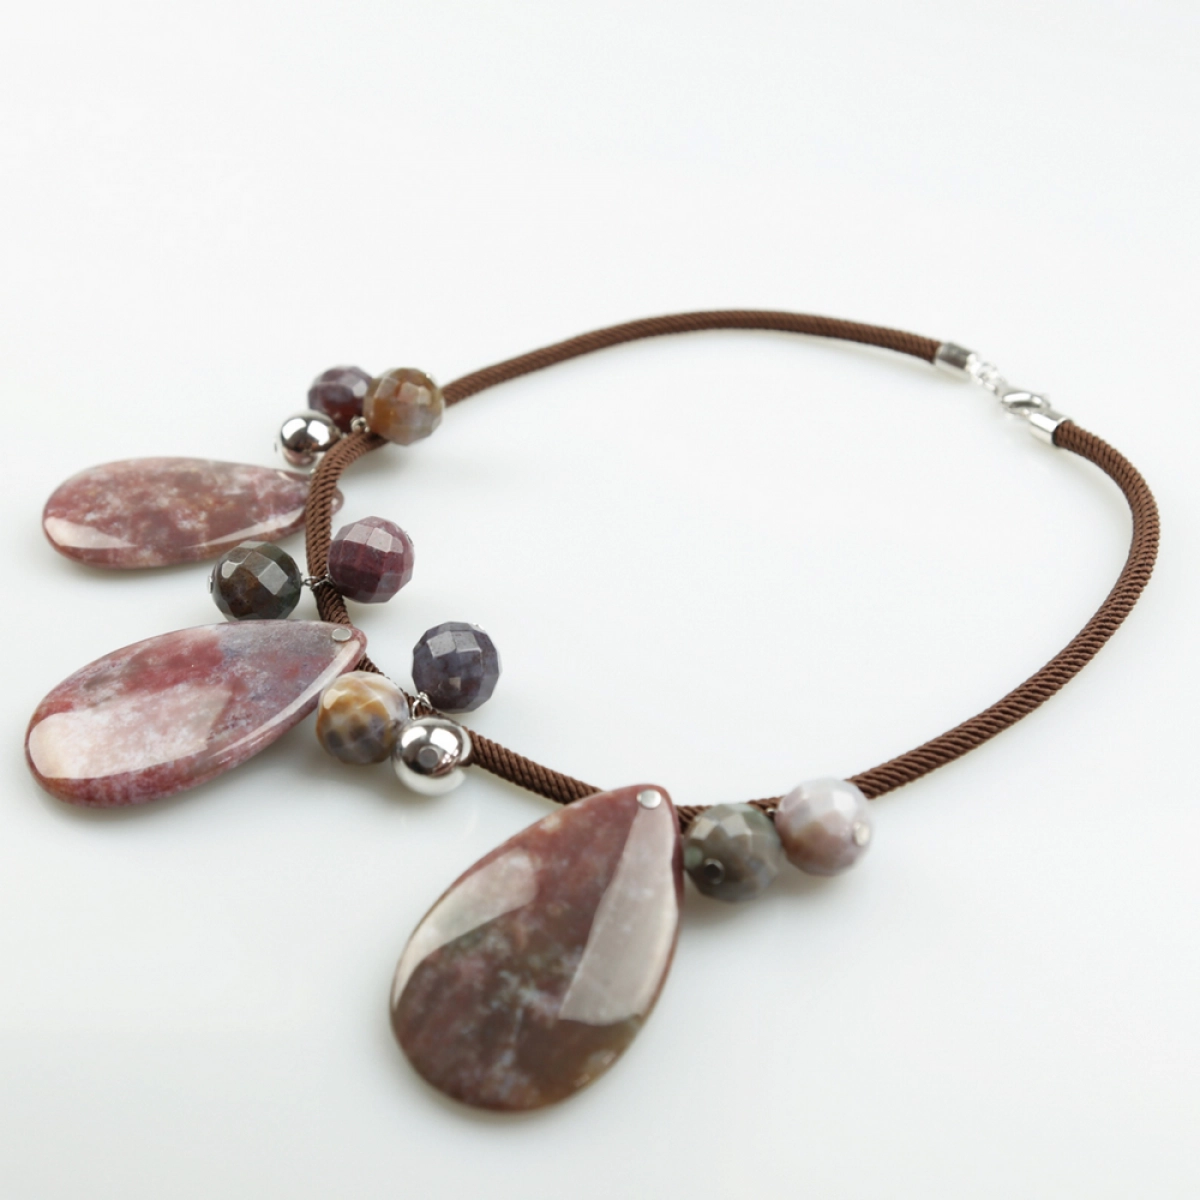 NECKLACE CORD AND AGATE INDIA PATRICIA GARCIA BUC260